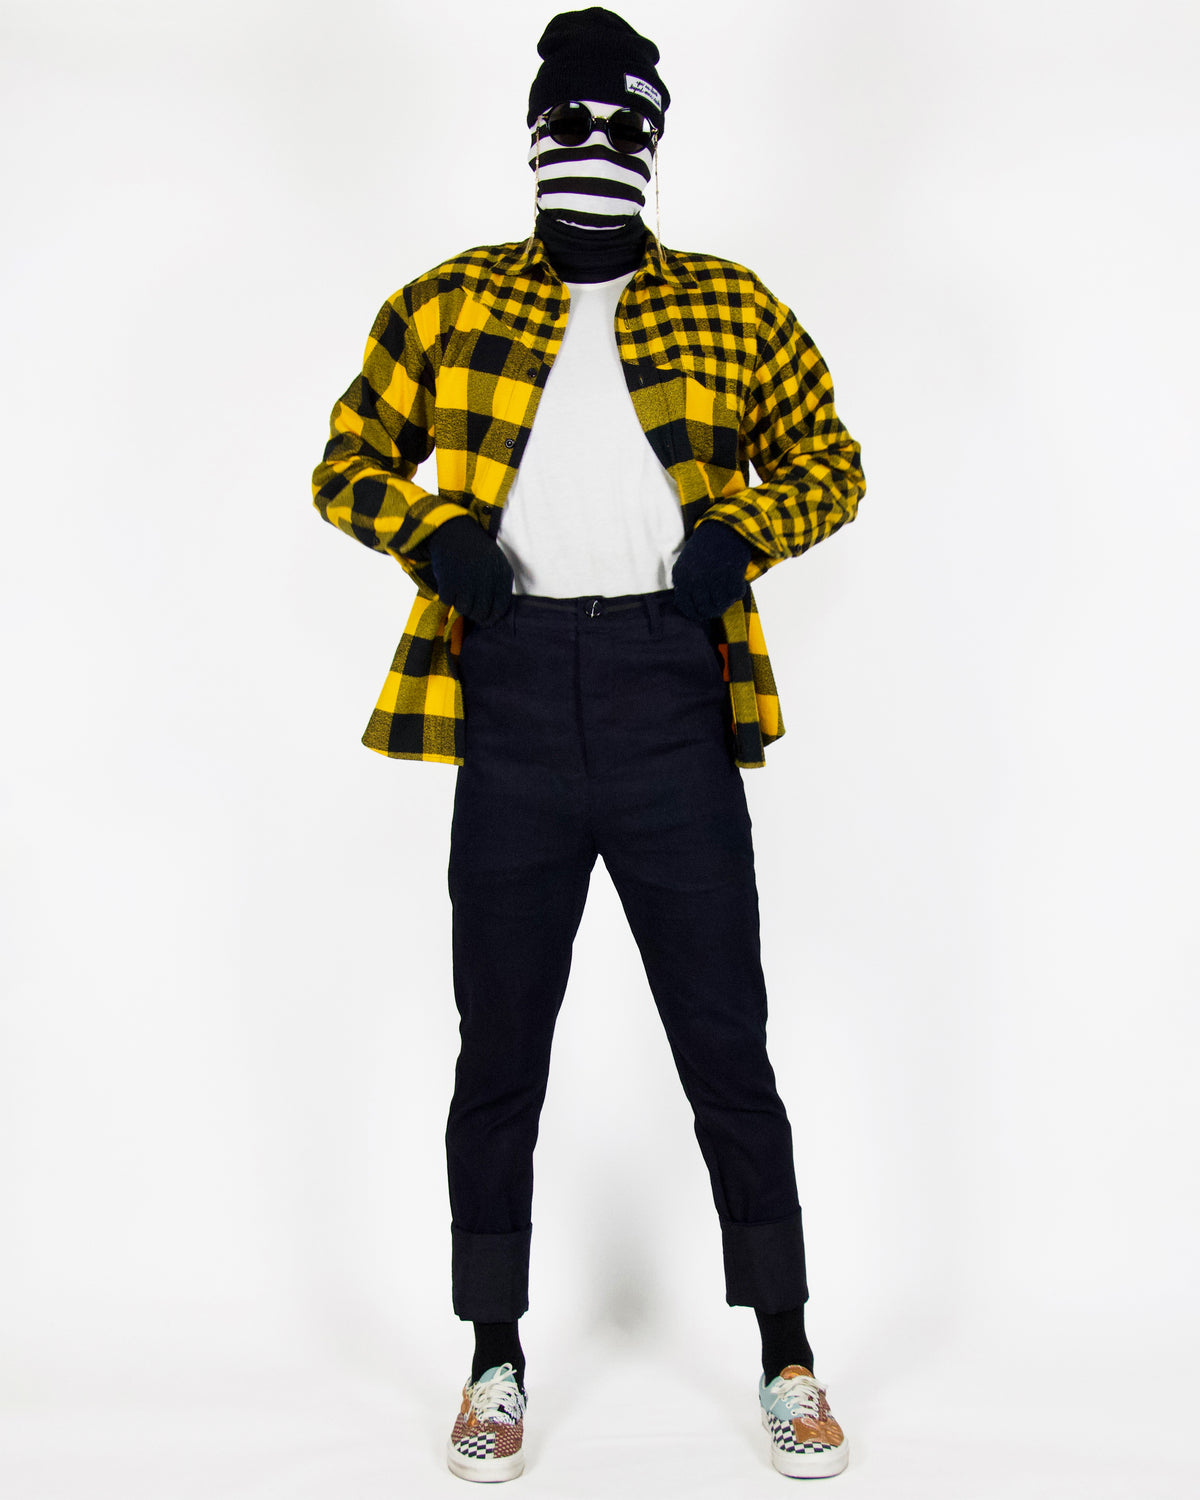 Carlos Button Up - Yellow Flannel